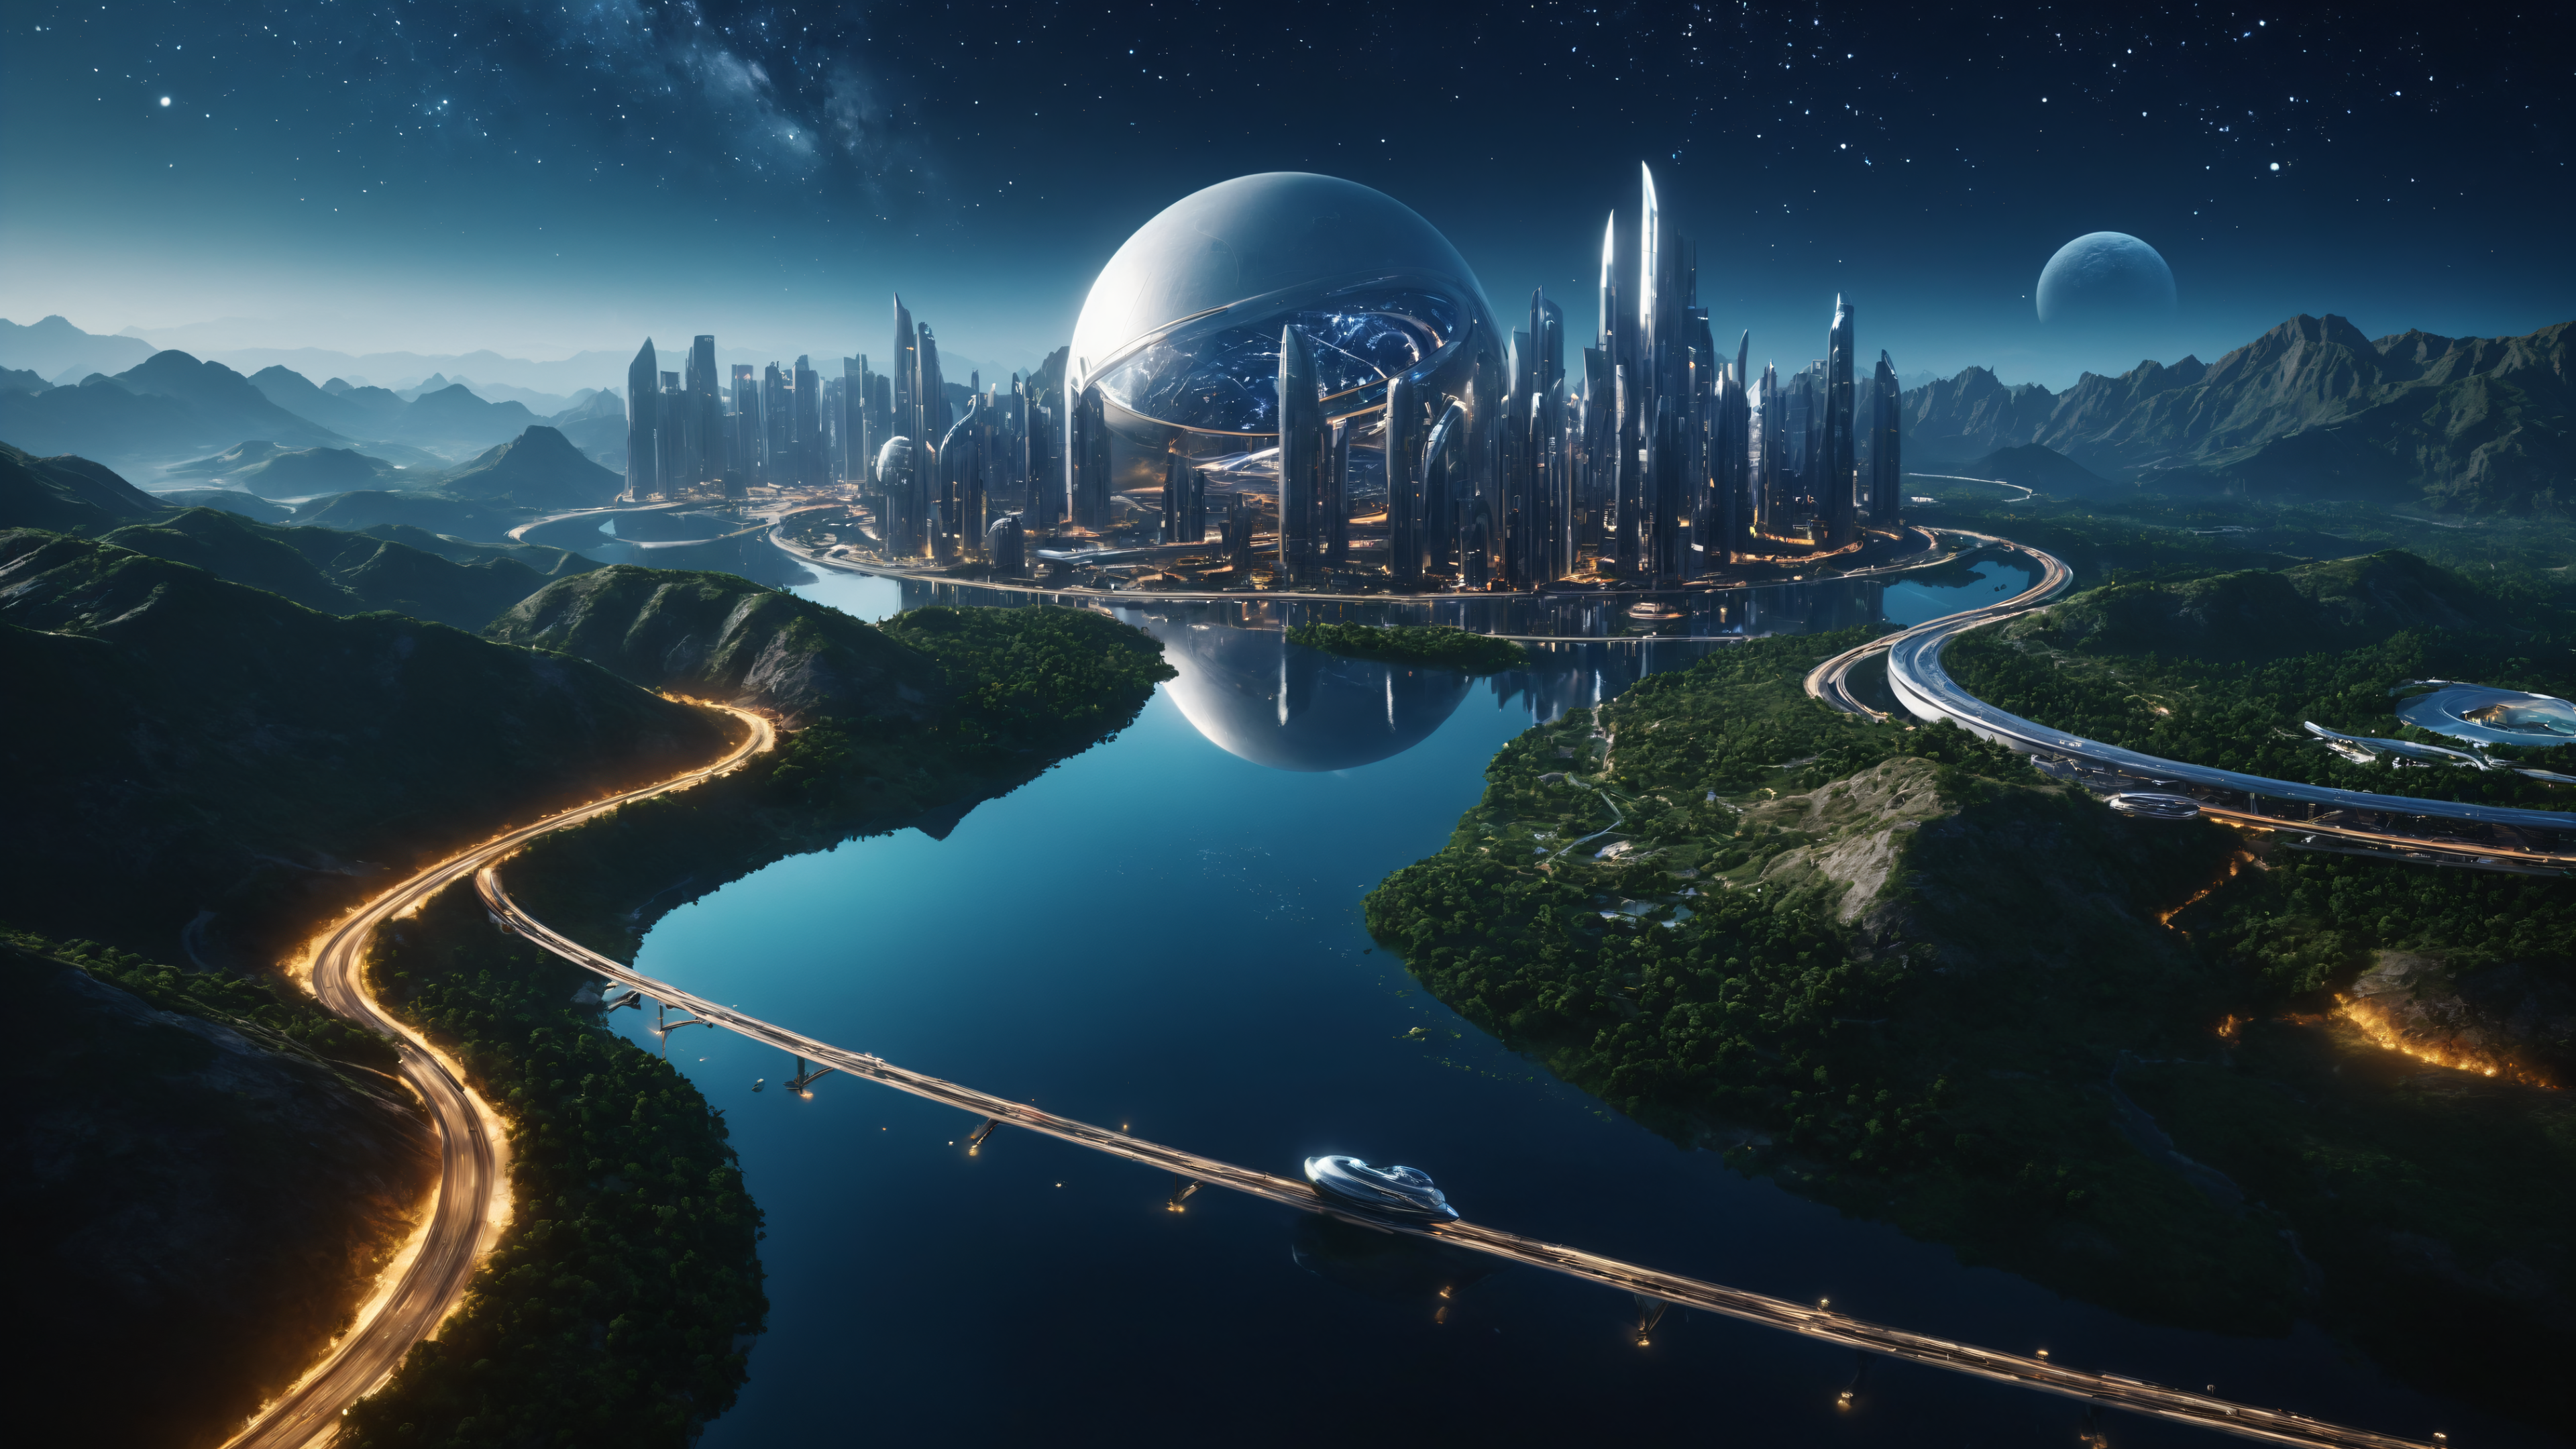 General 3840x2160 planet space city AI art water river lake reflection stars galaxy cityscape sky